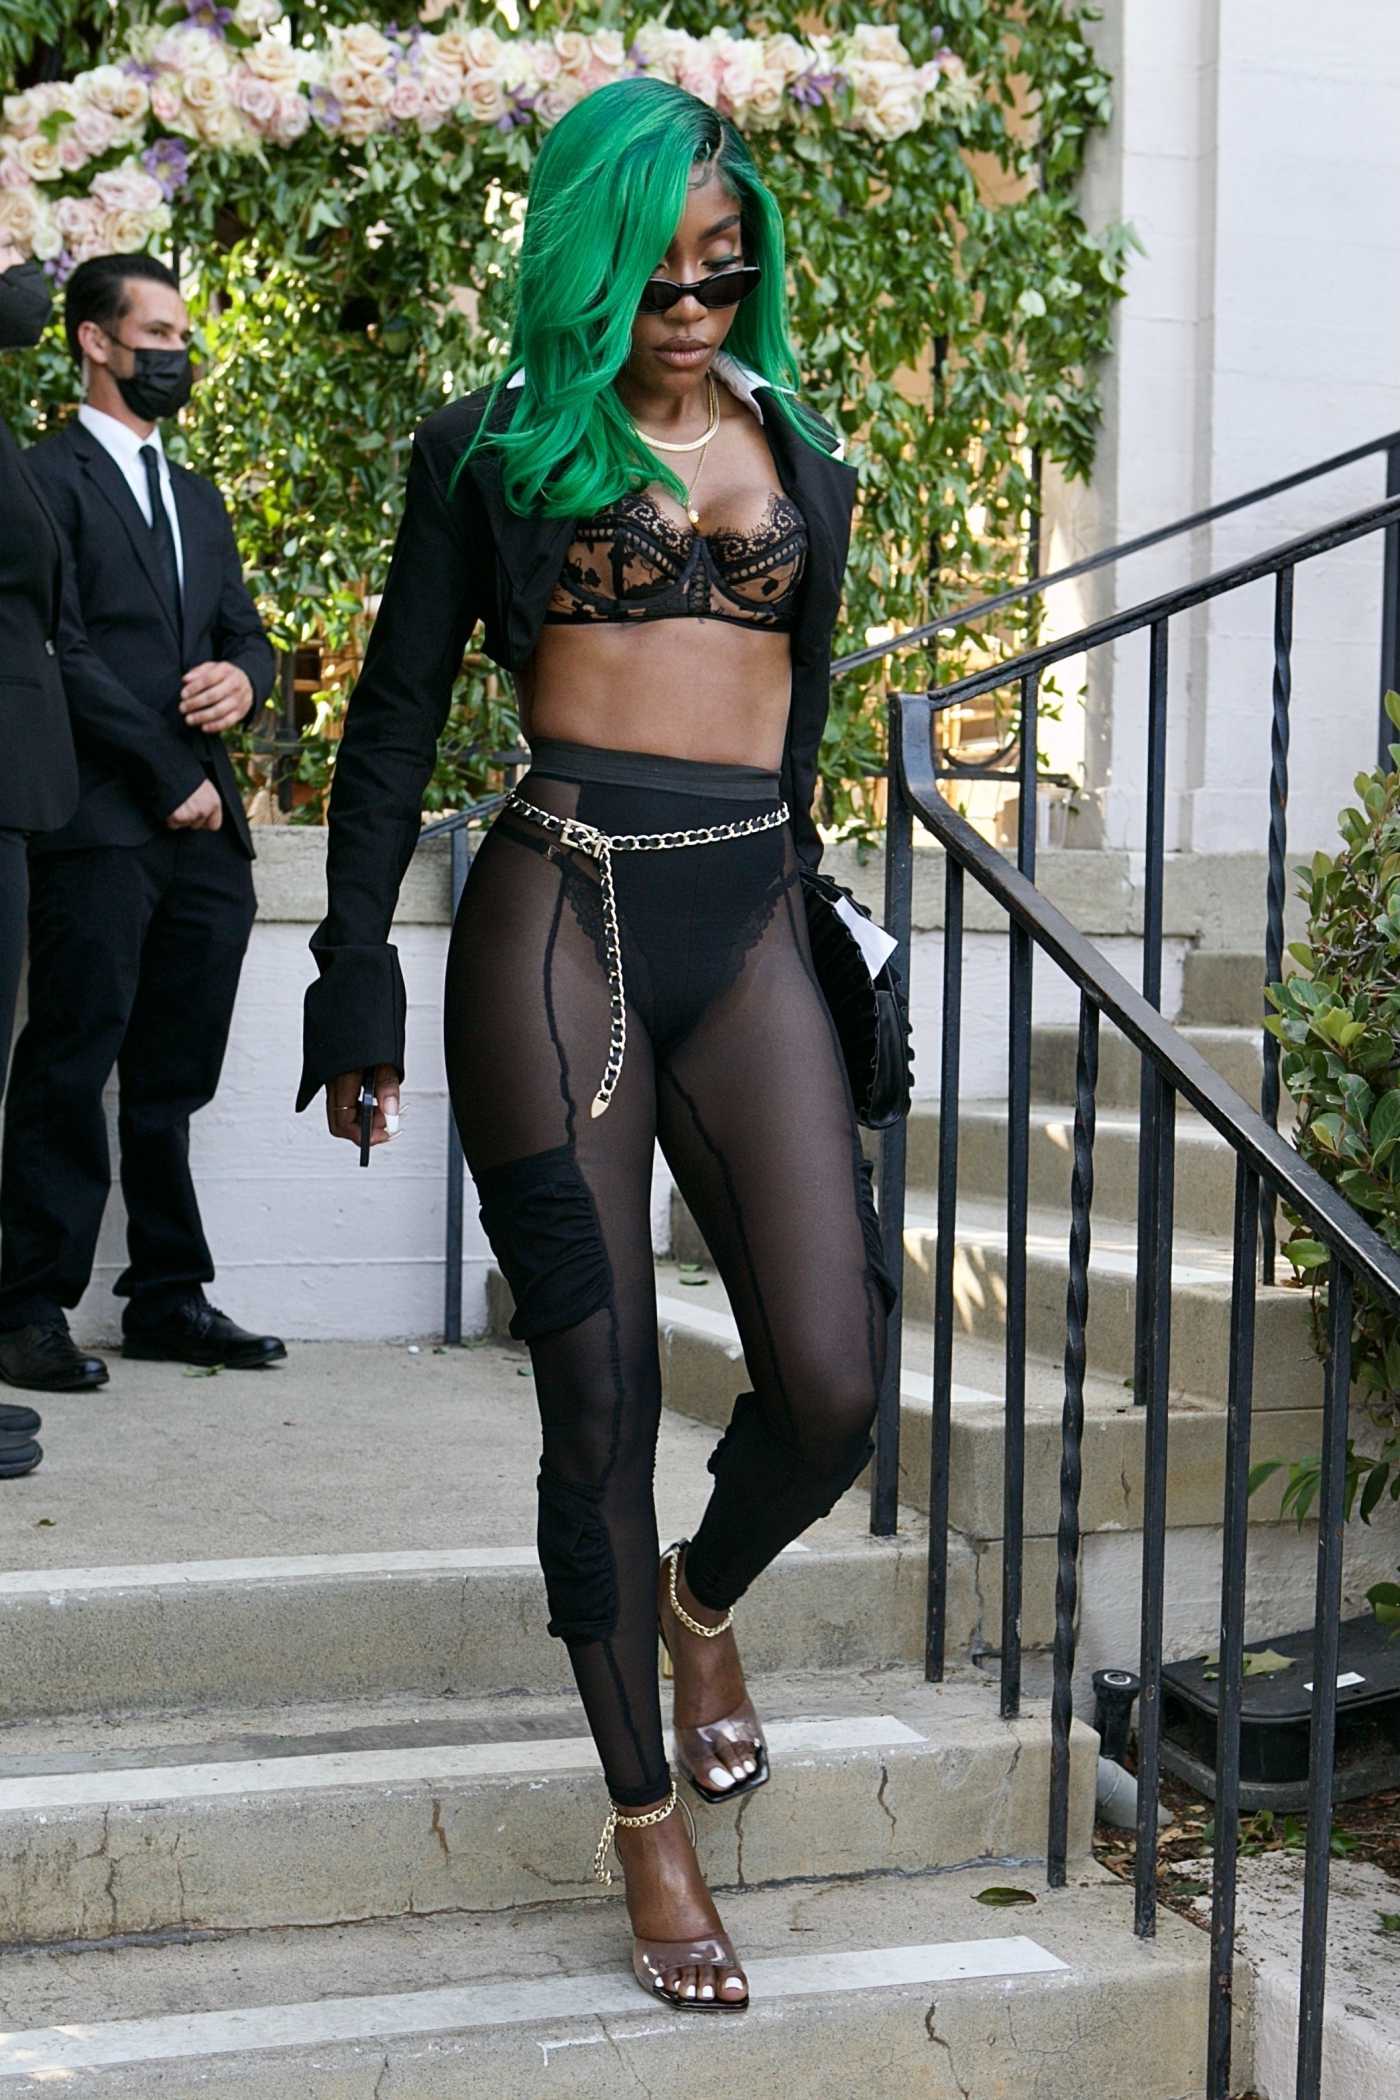 Sevyn Streeter in a Black See-Through Leggings Arrives to the Lionne Garden FW21 Show in Los Angeles 08/15/2021